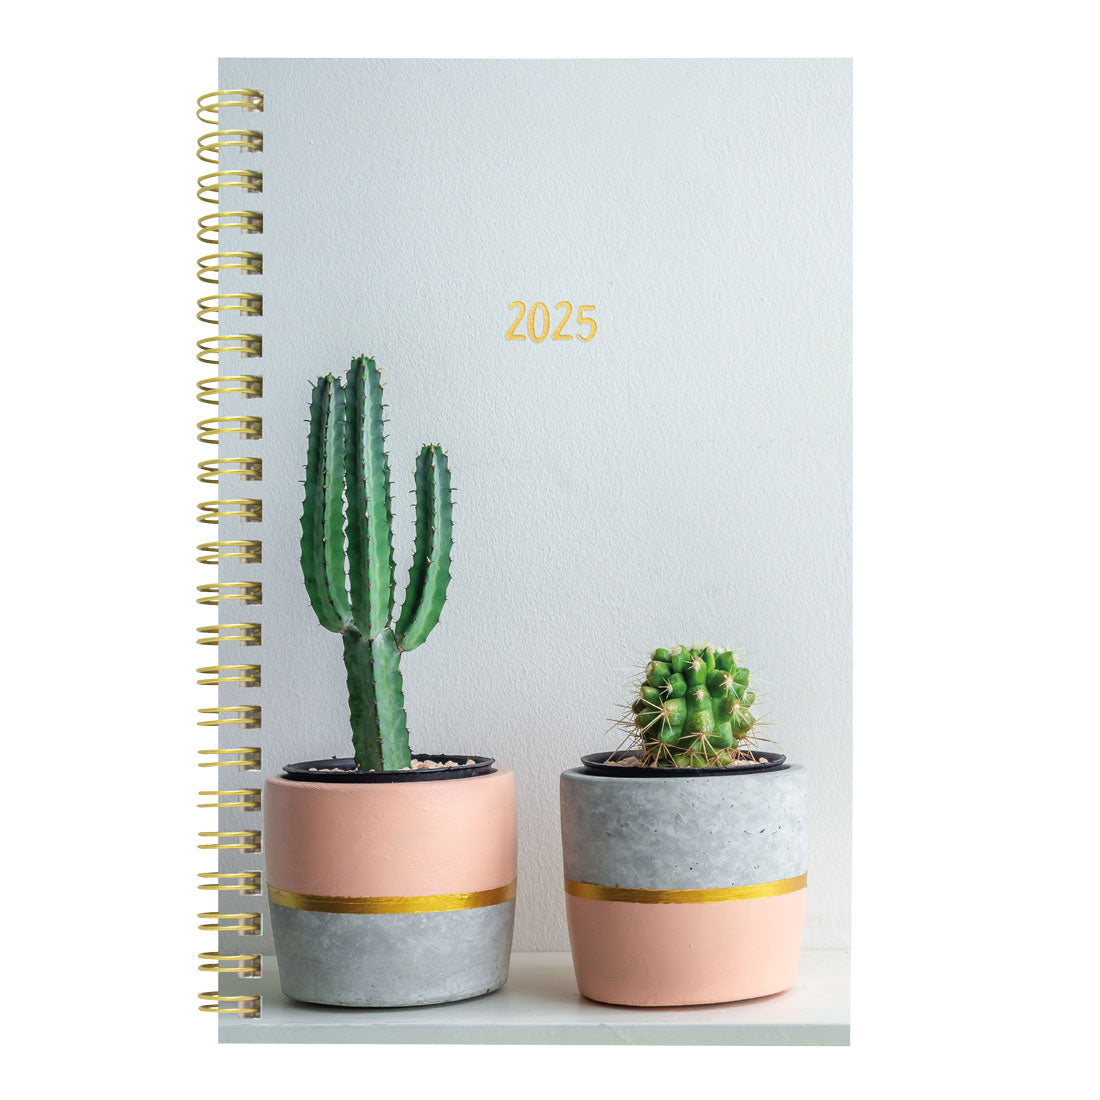 Succulent Plants Weekly/Monthly Planner 2025, Bilingual, C101BPT.01